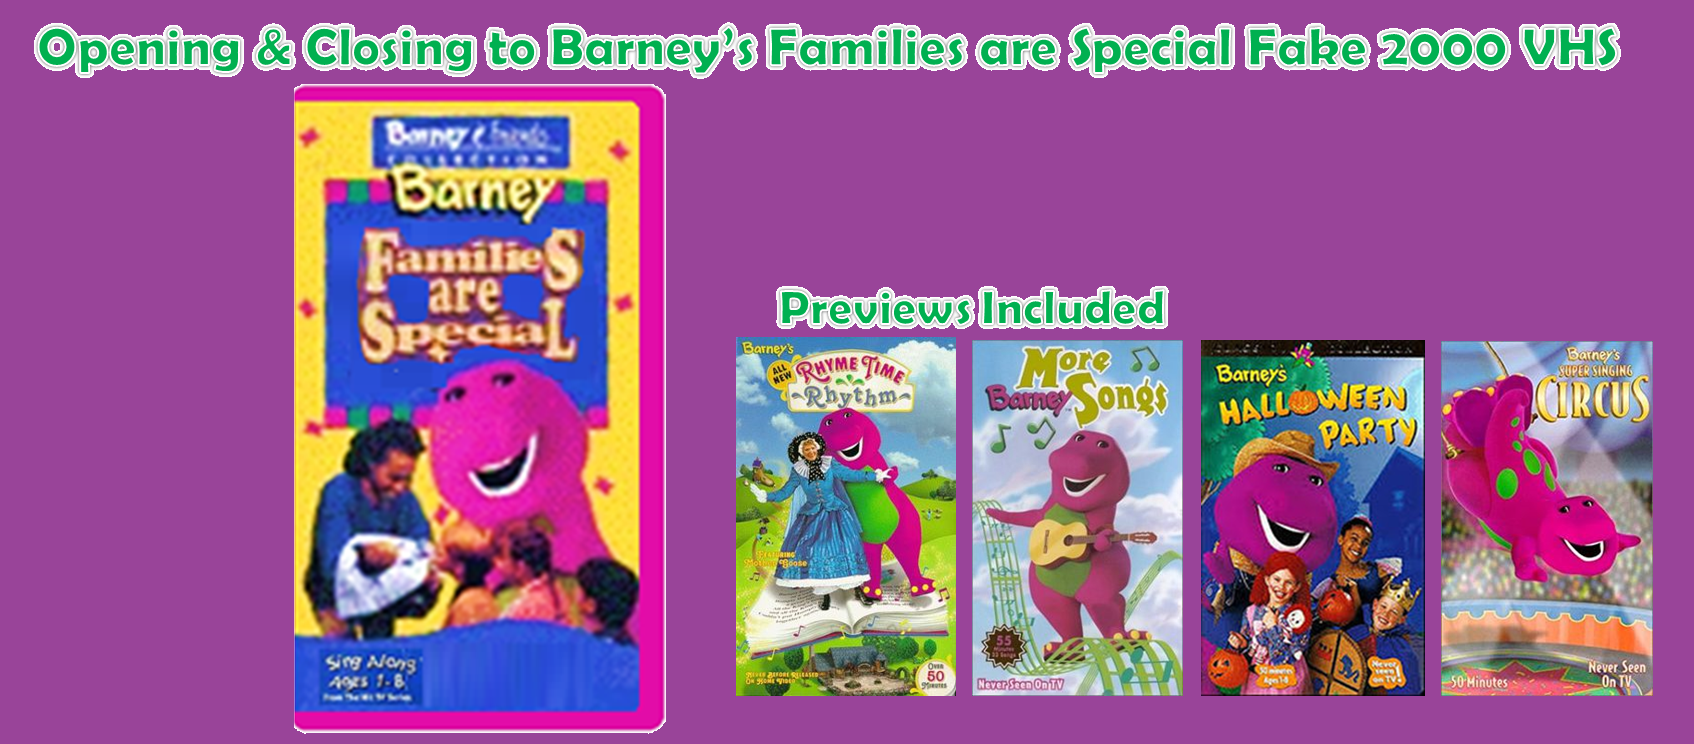 Opening and Closing to Barney's Families are Special 2000 ...